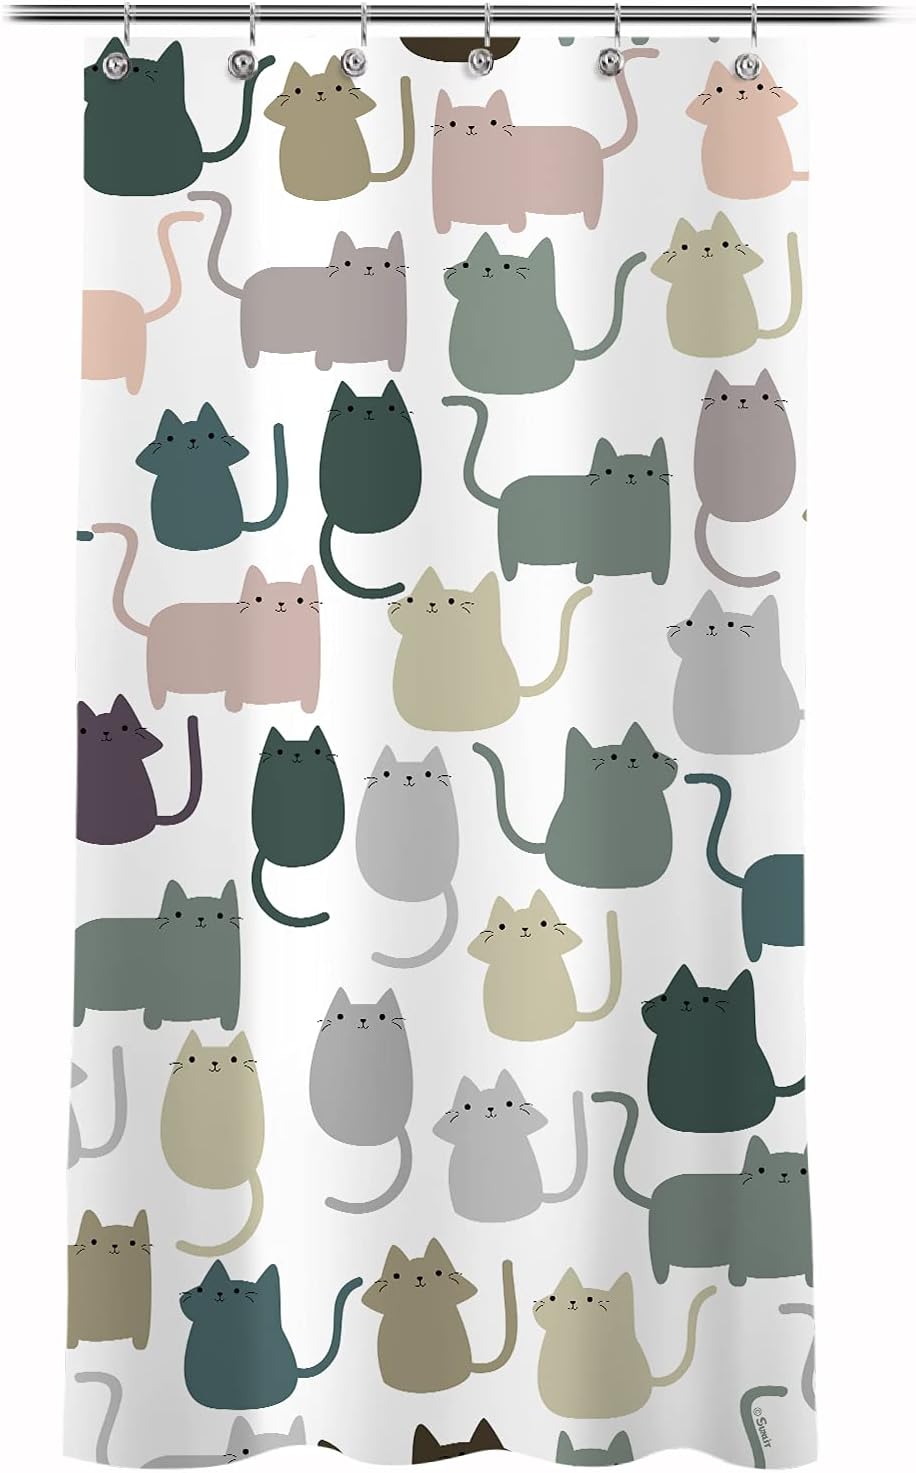 Sunlit Design Lovely Multicolor Cartoon Cats Fabric Shower Curtain, Cute Cats Bathroom Decoration Curtains for Baby Kids Children